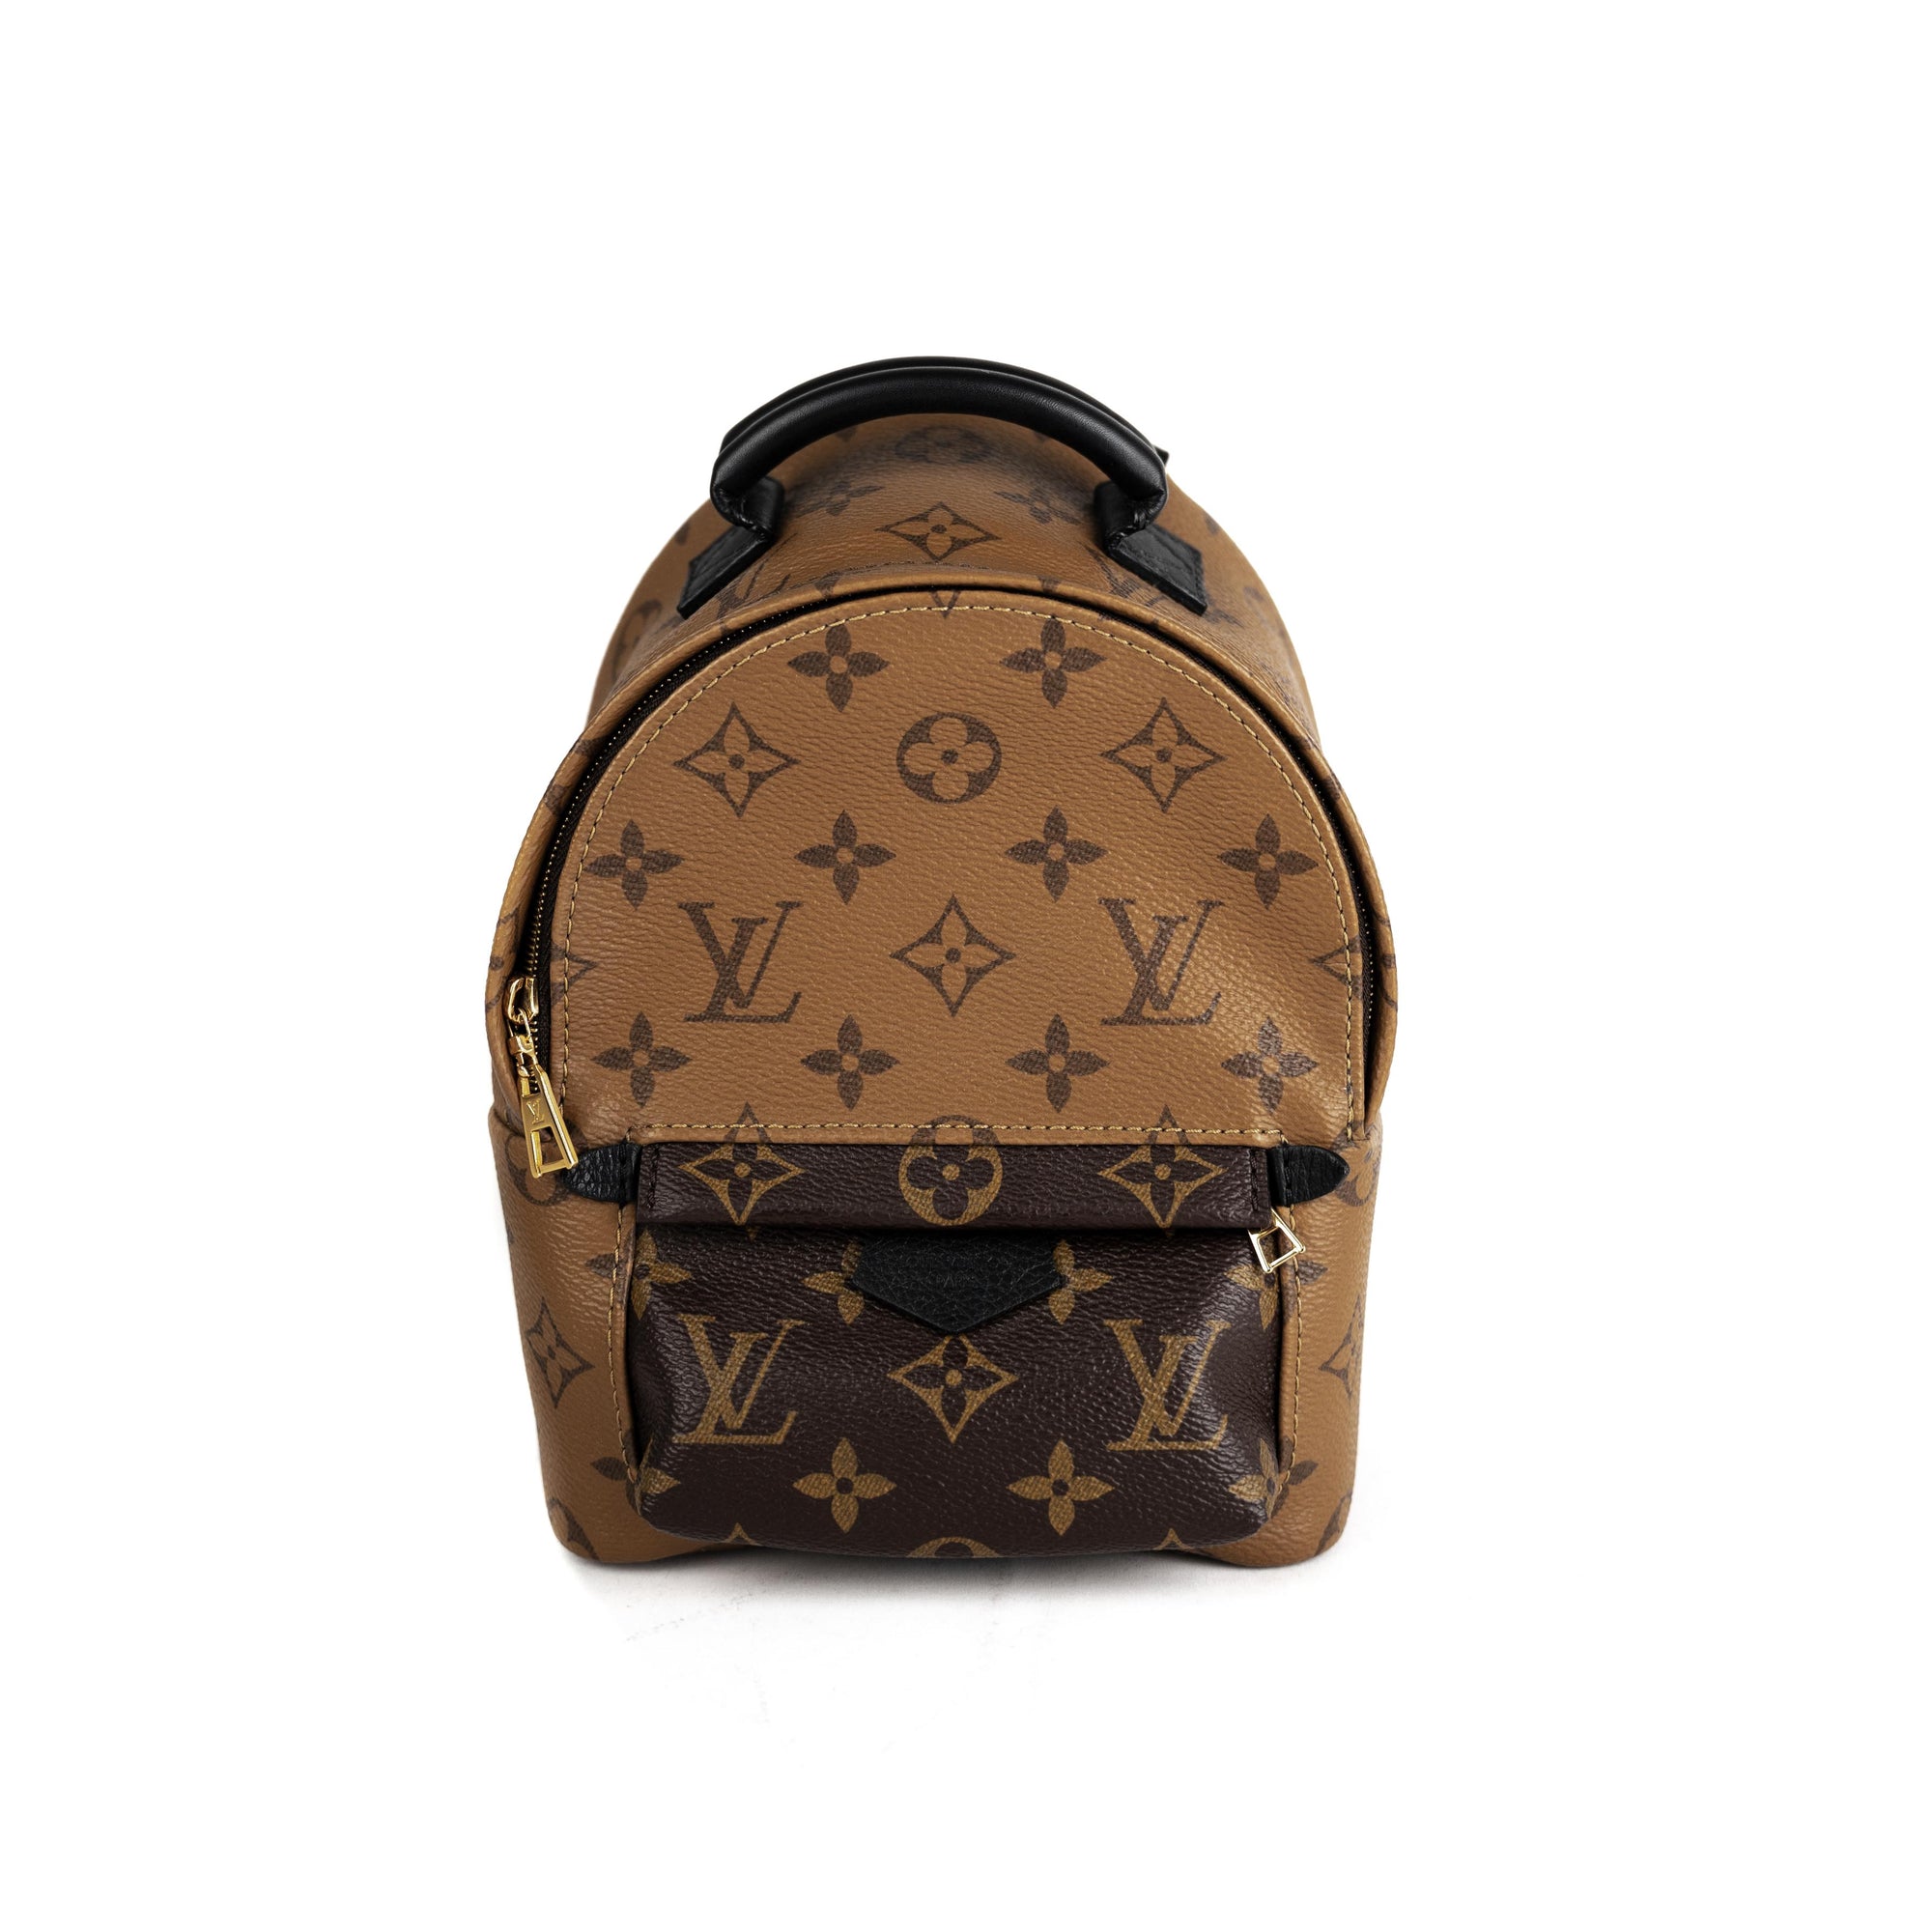 Luis Vuitton Palm Spring Mini Reverse Monogram W Pouch for Sale in